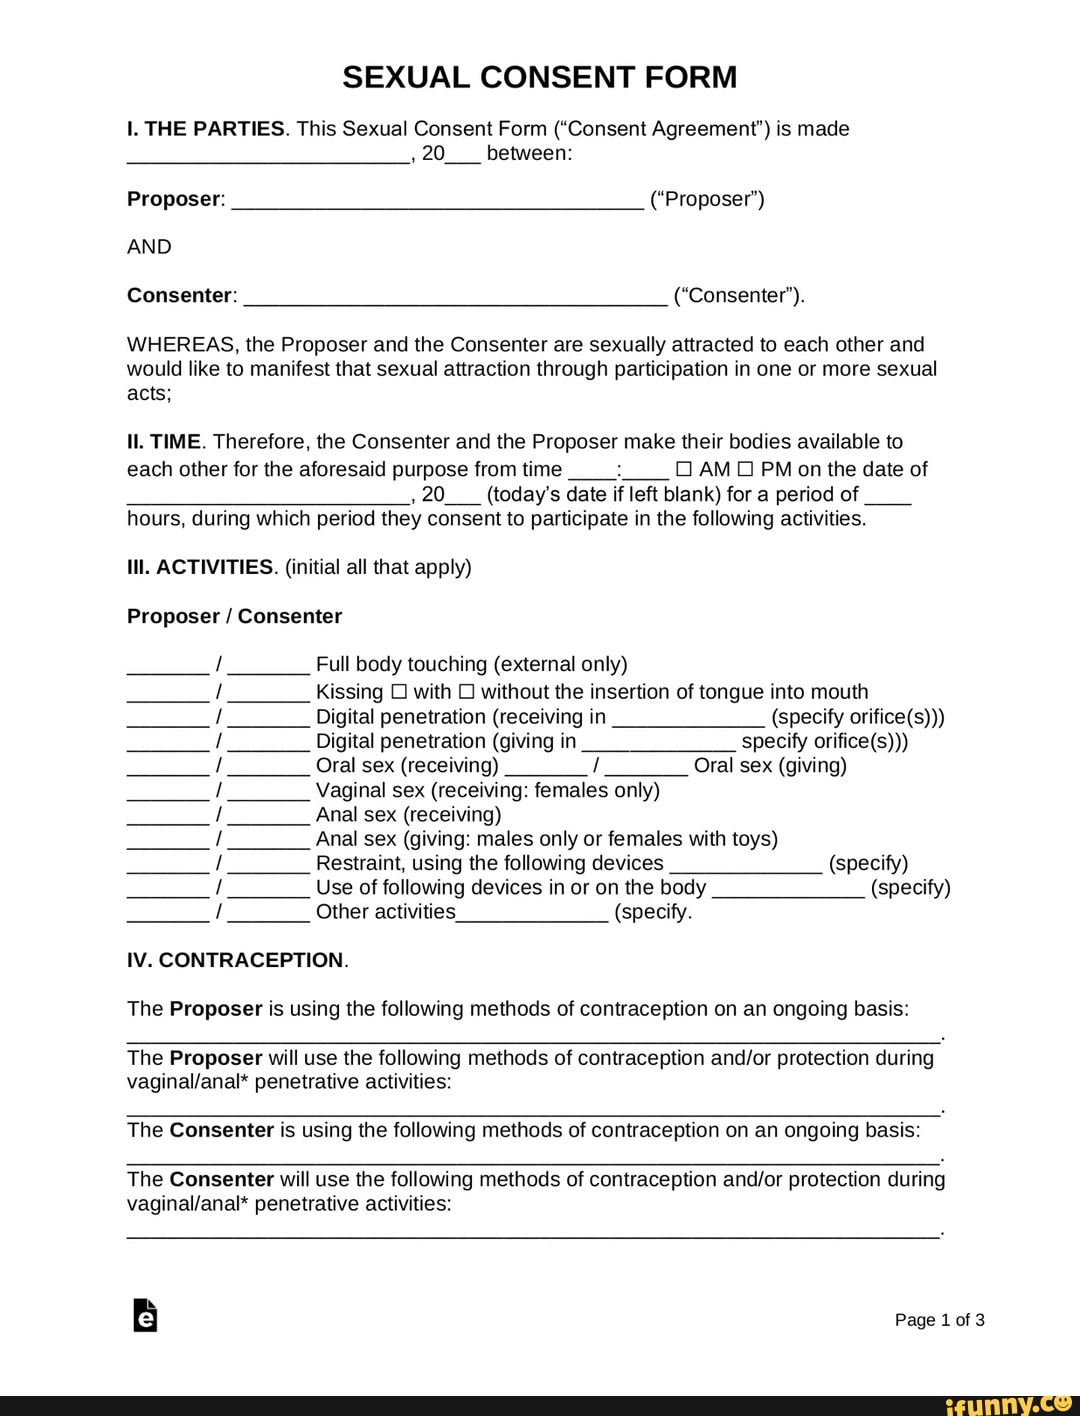 Sexual Consent Form 1 The Parties This Sexual Consent Form Consent